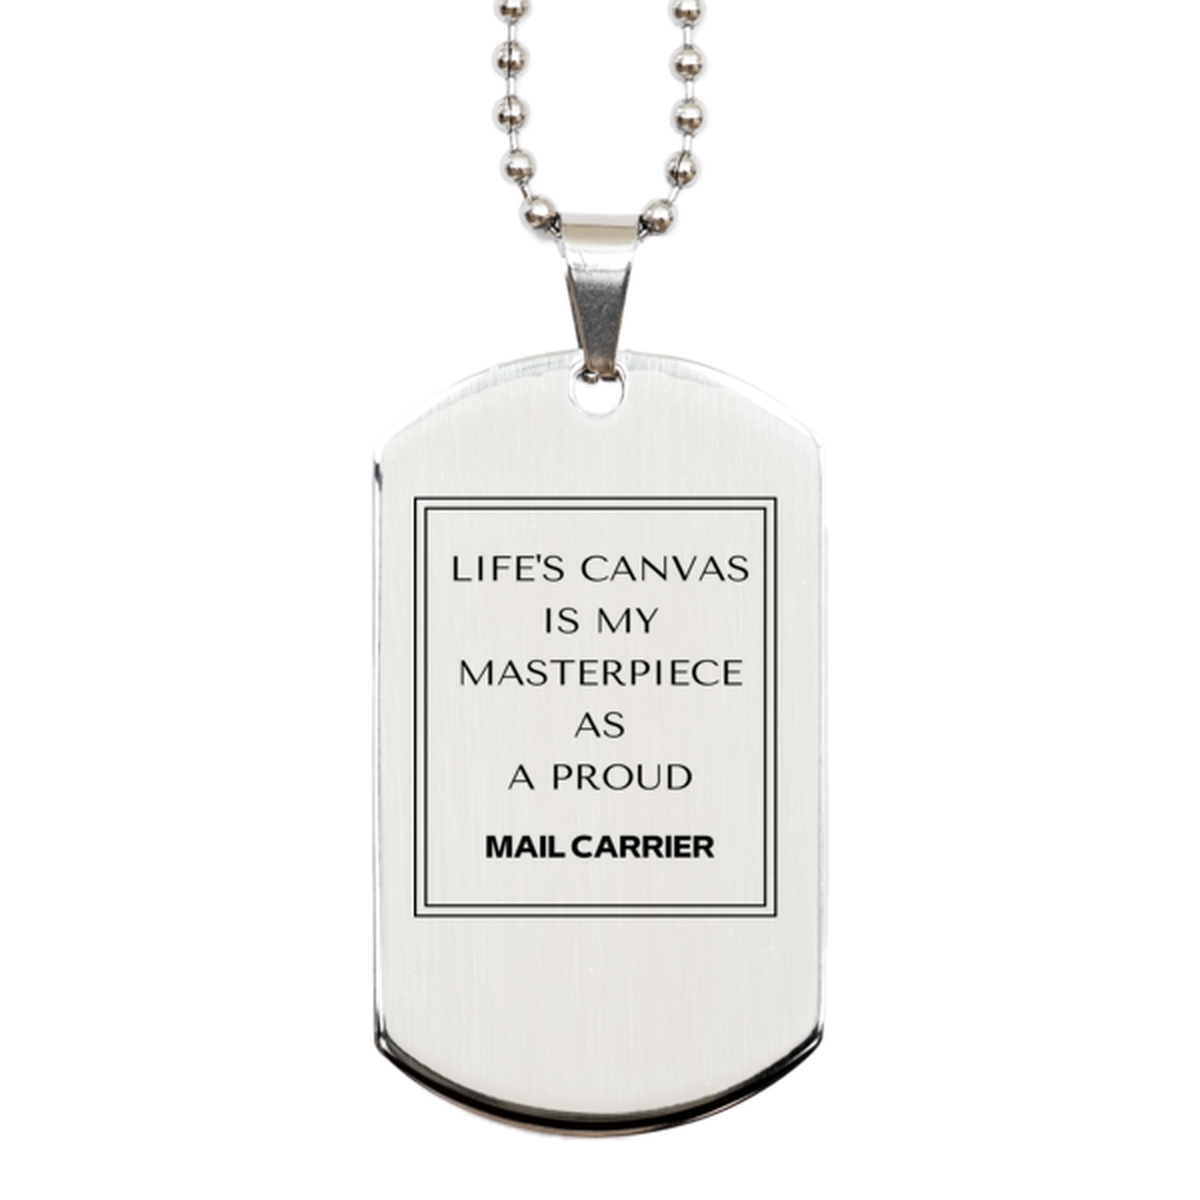 Proud Mail Carrier Gifts, Life's canvas is my masterpiece, Epic Birthday Christmas Unique Silver Dog Tag For Mail Carrier, Coworkers, Men, Women, Friends